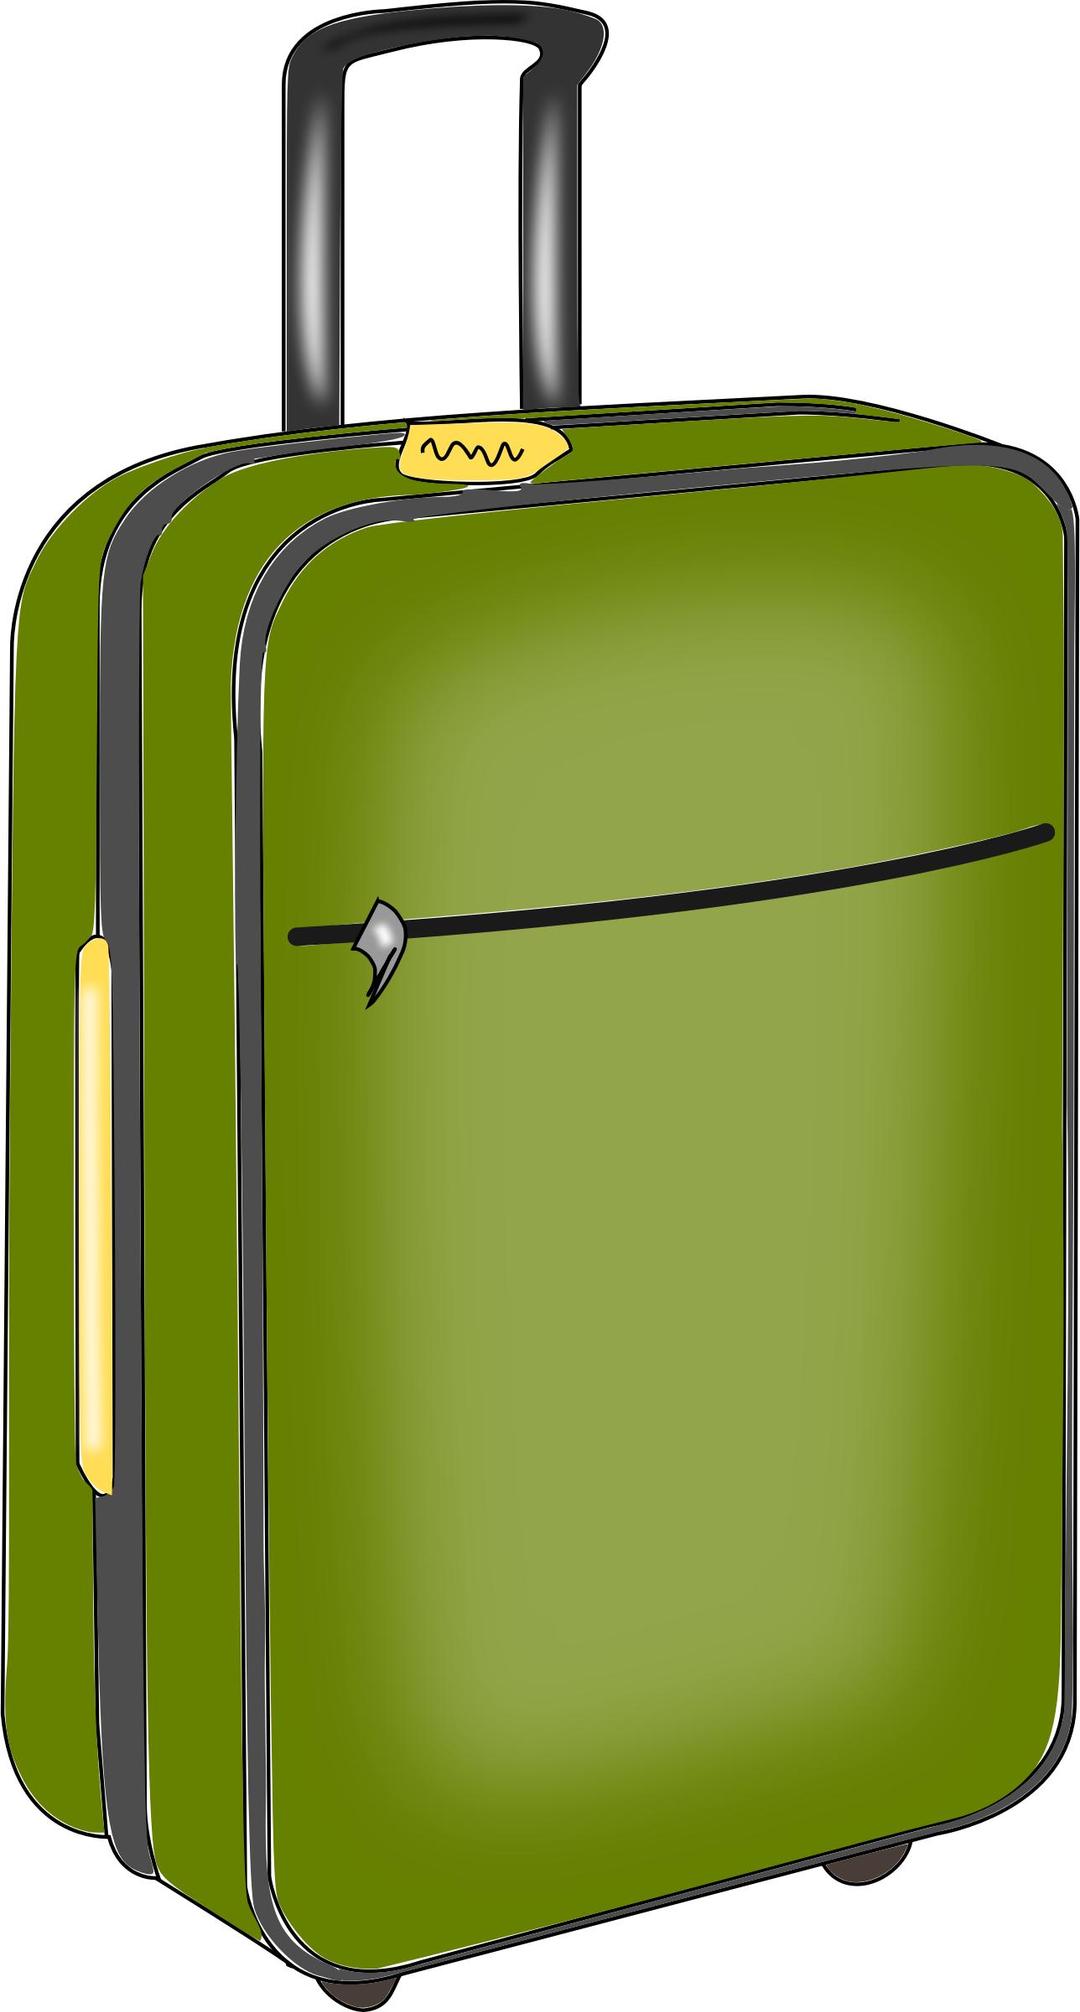 luggage png transparent